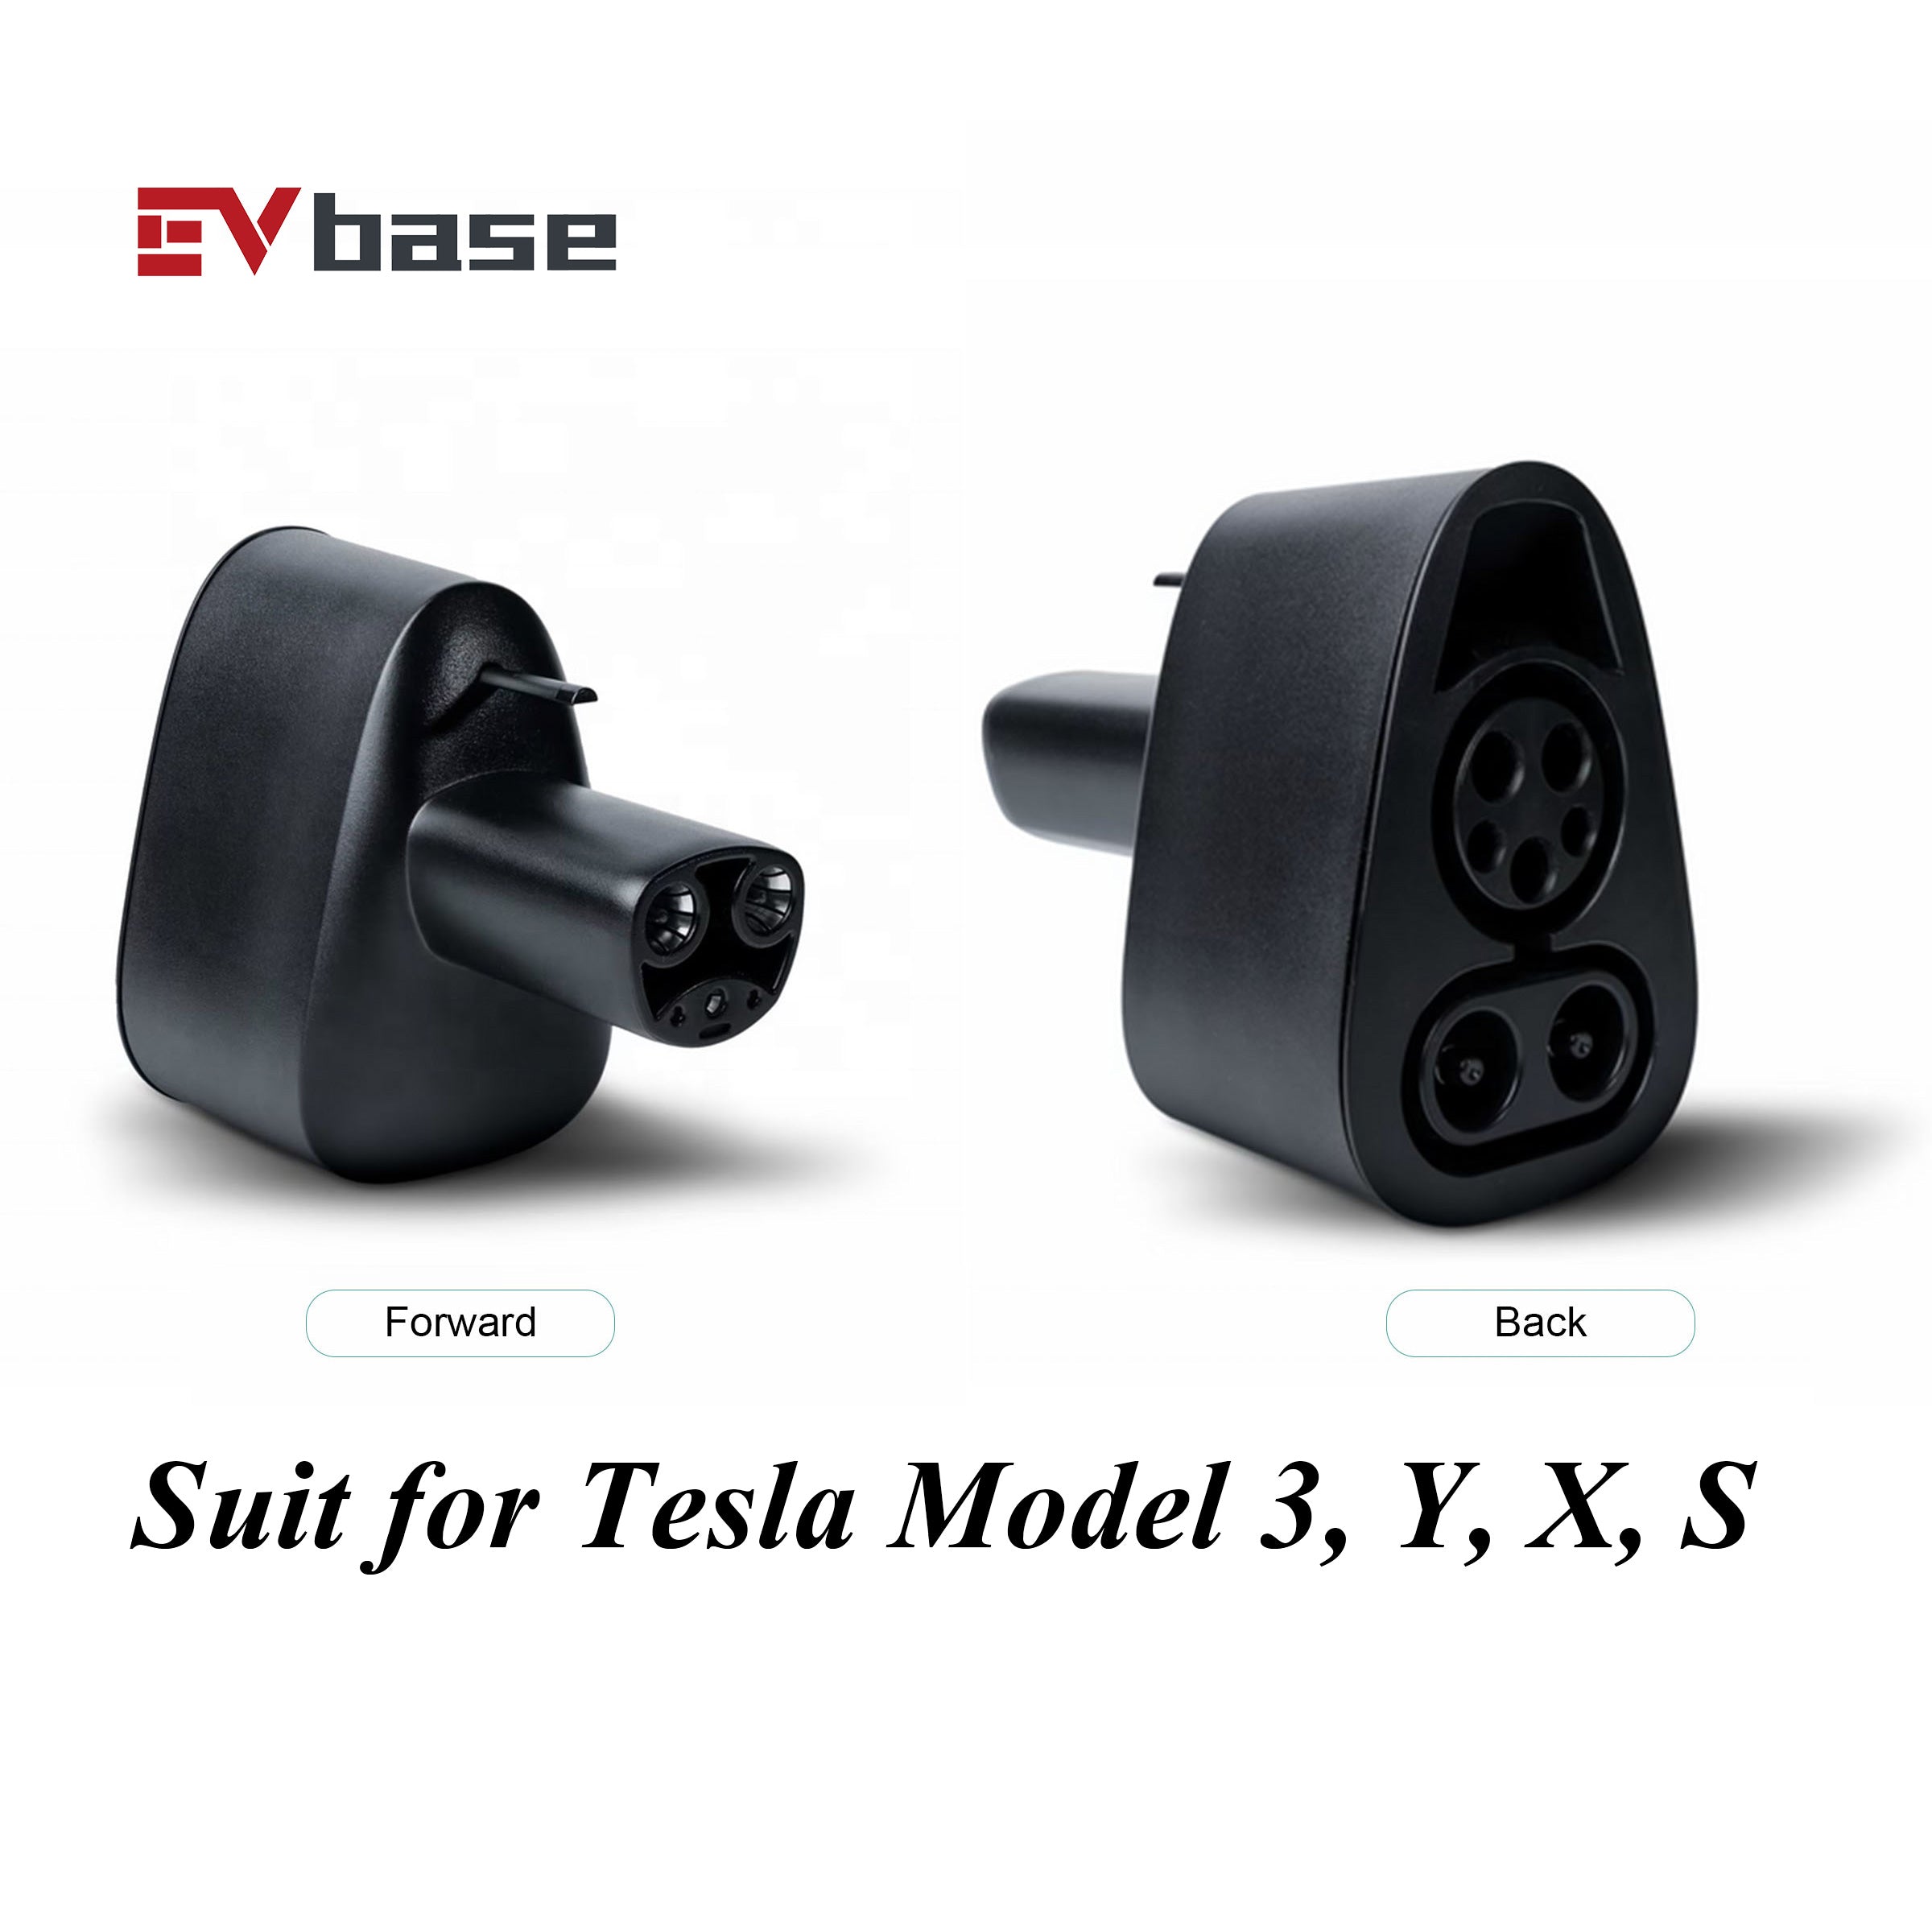 Tesla ccs 1 adapter - Quality adapters with free shipping